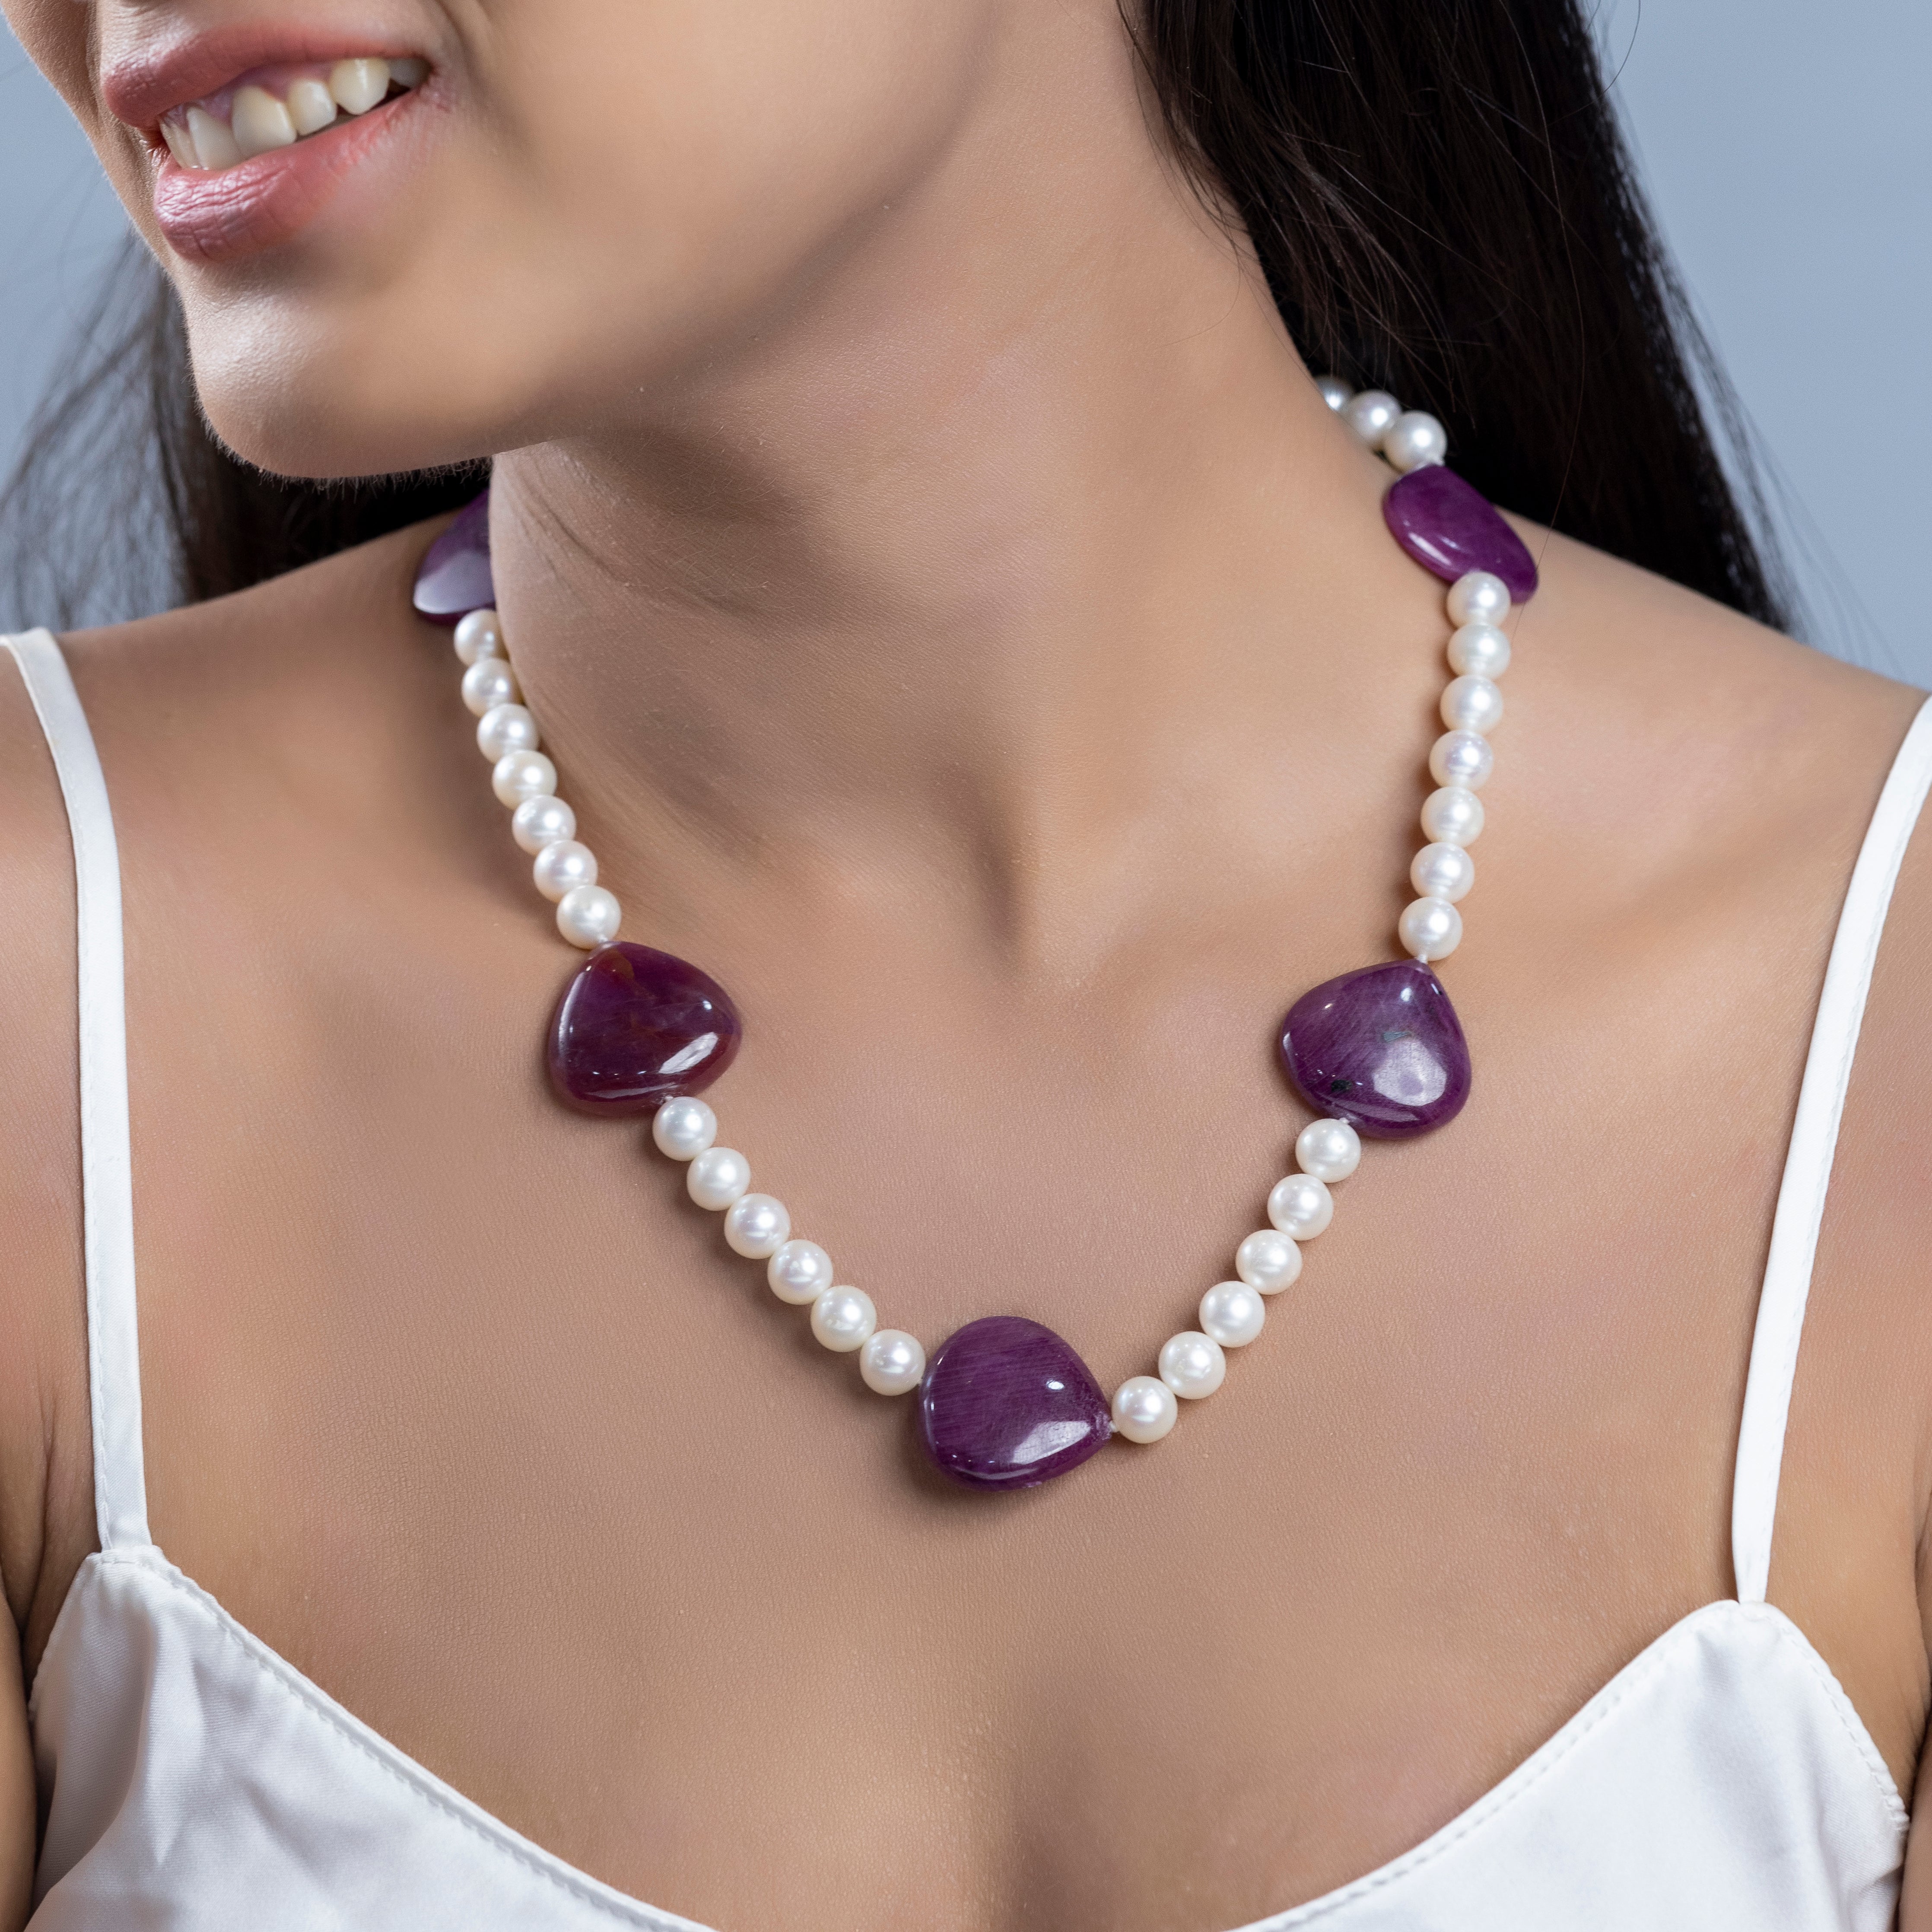 Freshwater Pearl and Heart-Shape Ruby Fusion Necklace